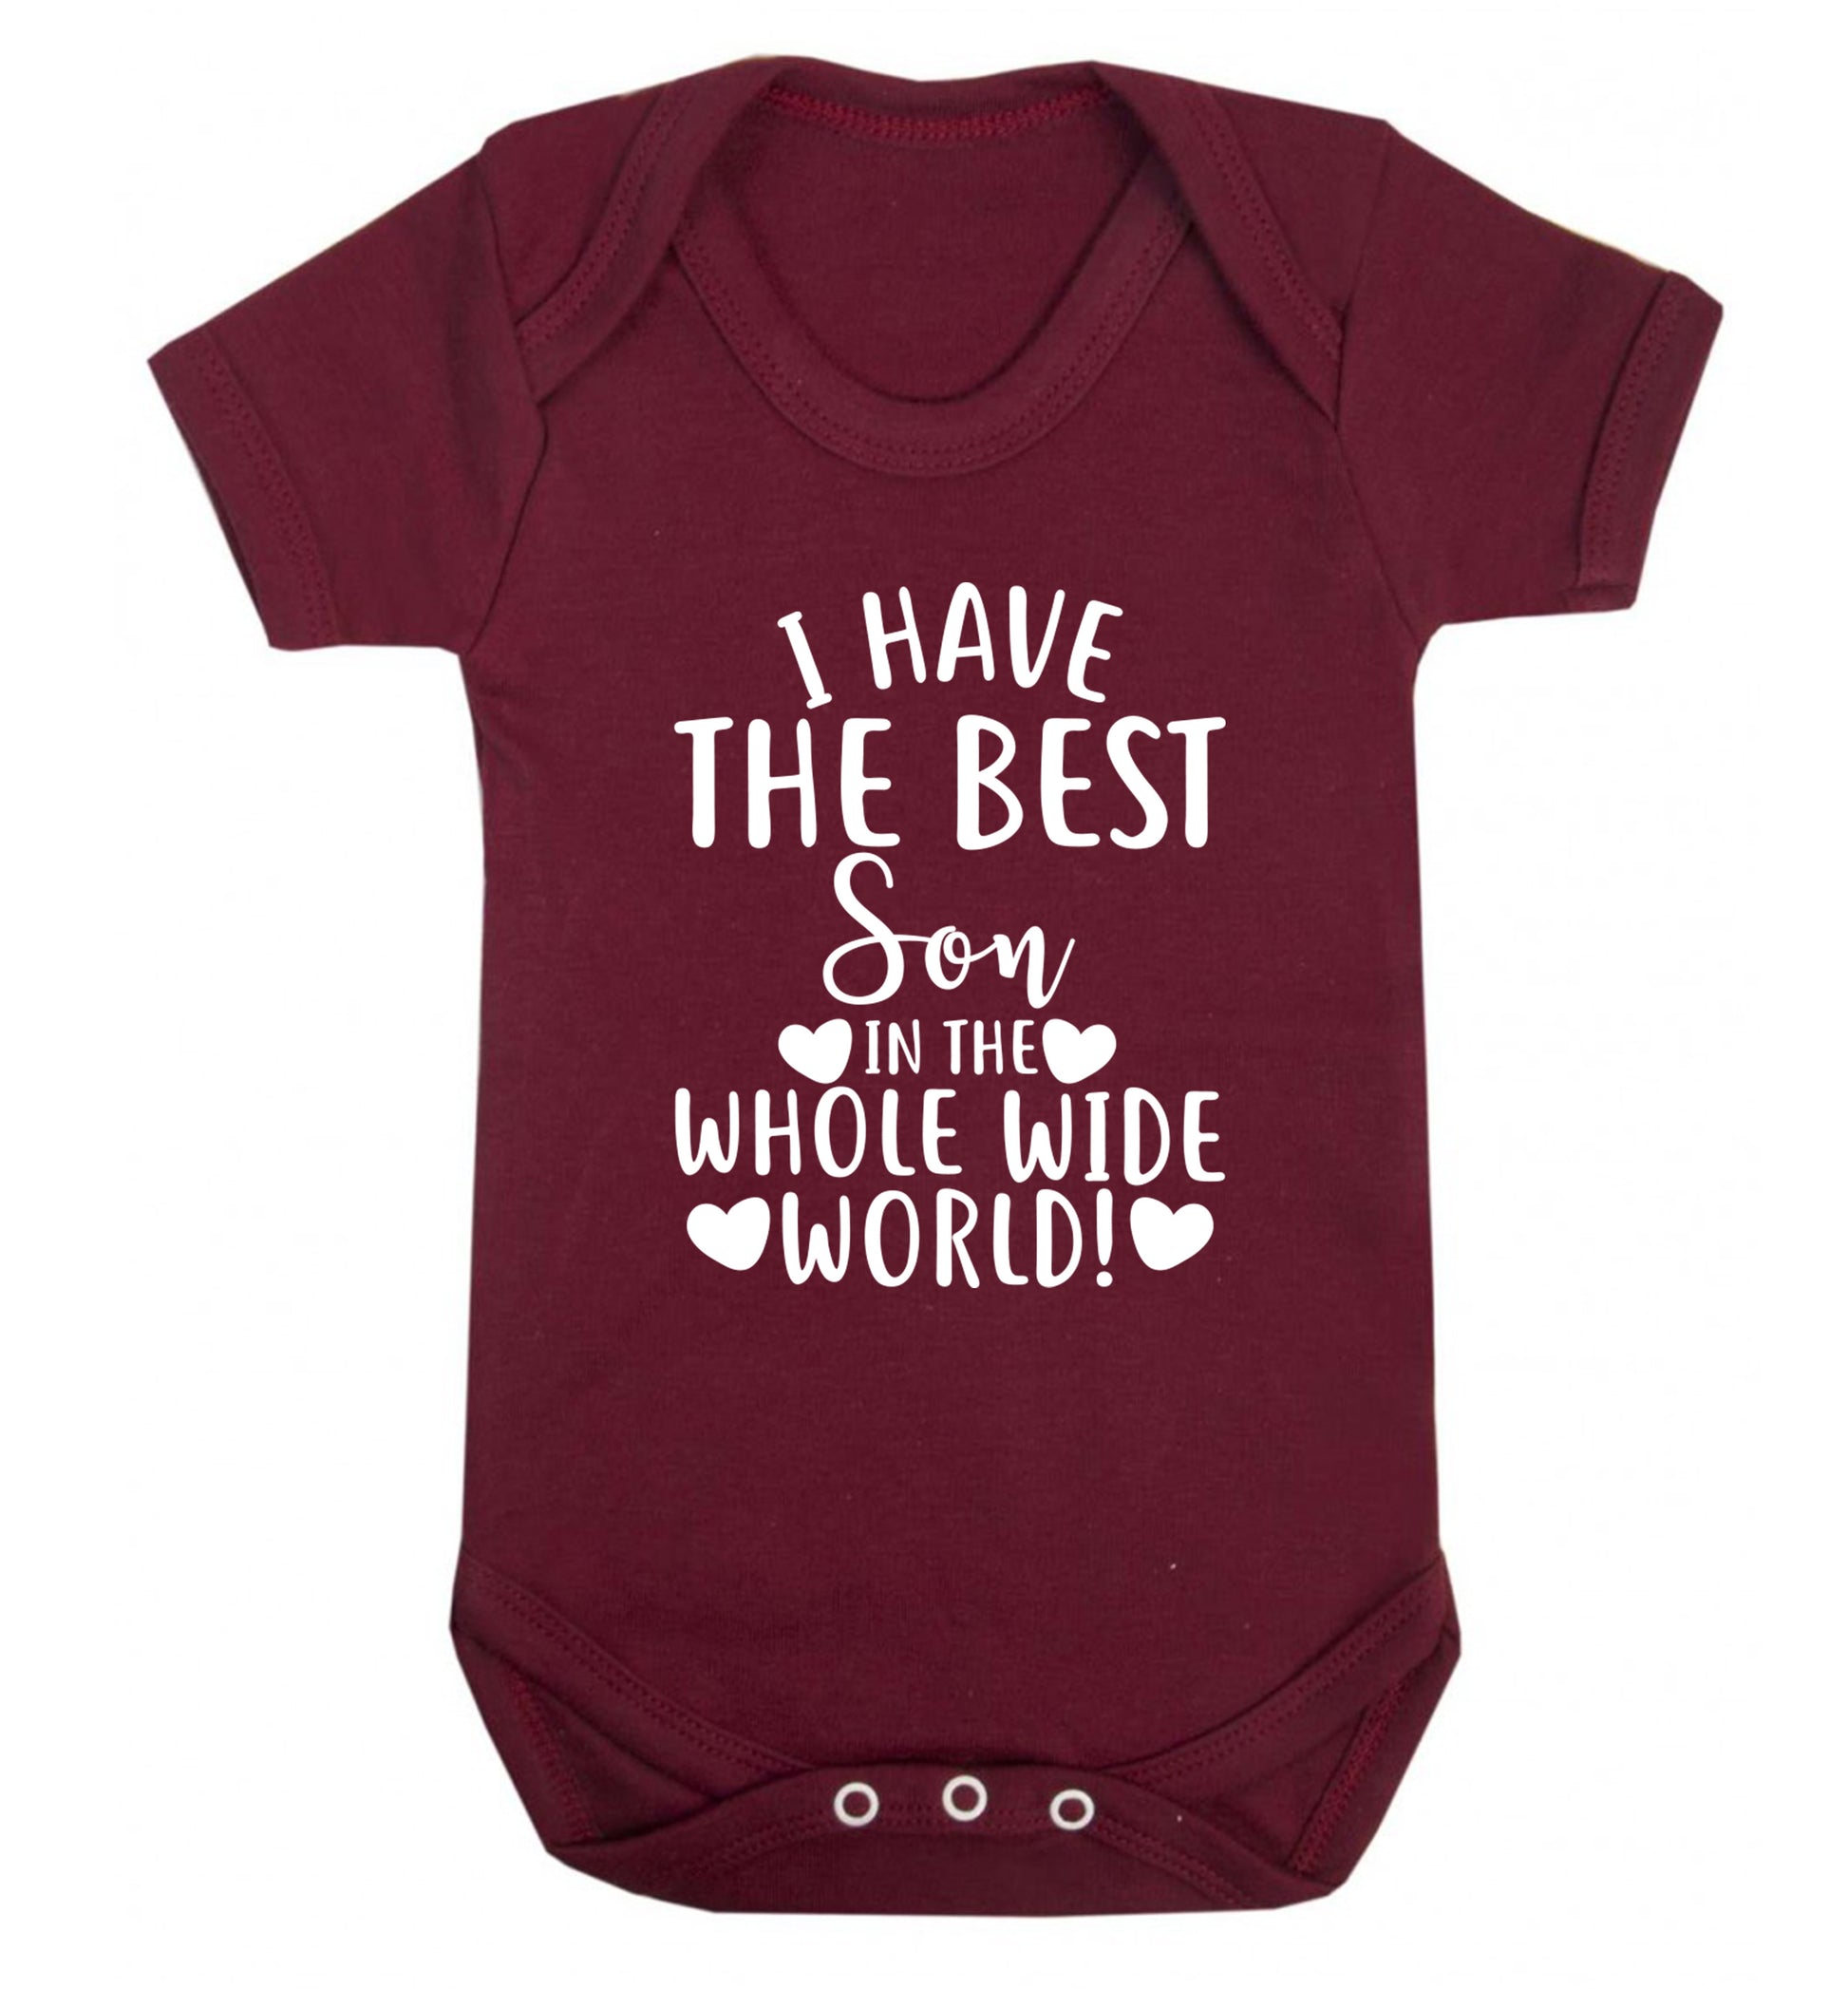 I have the best son in the whole wide world! Baby Vest maroon 18-24 months